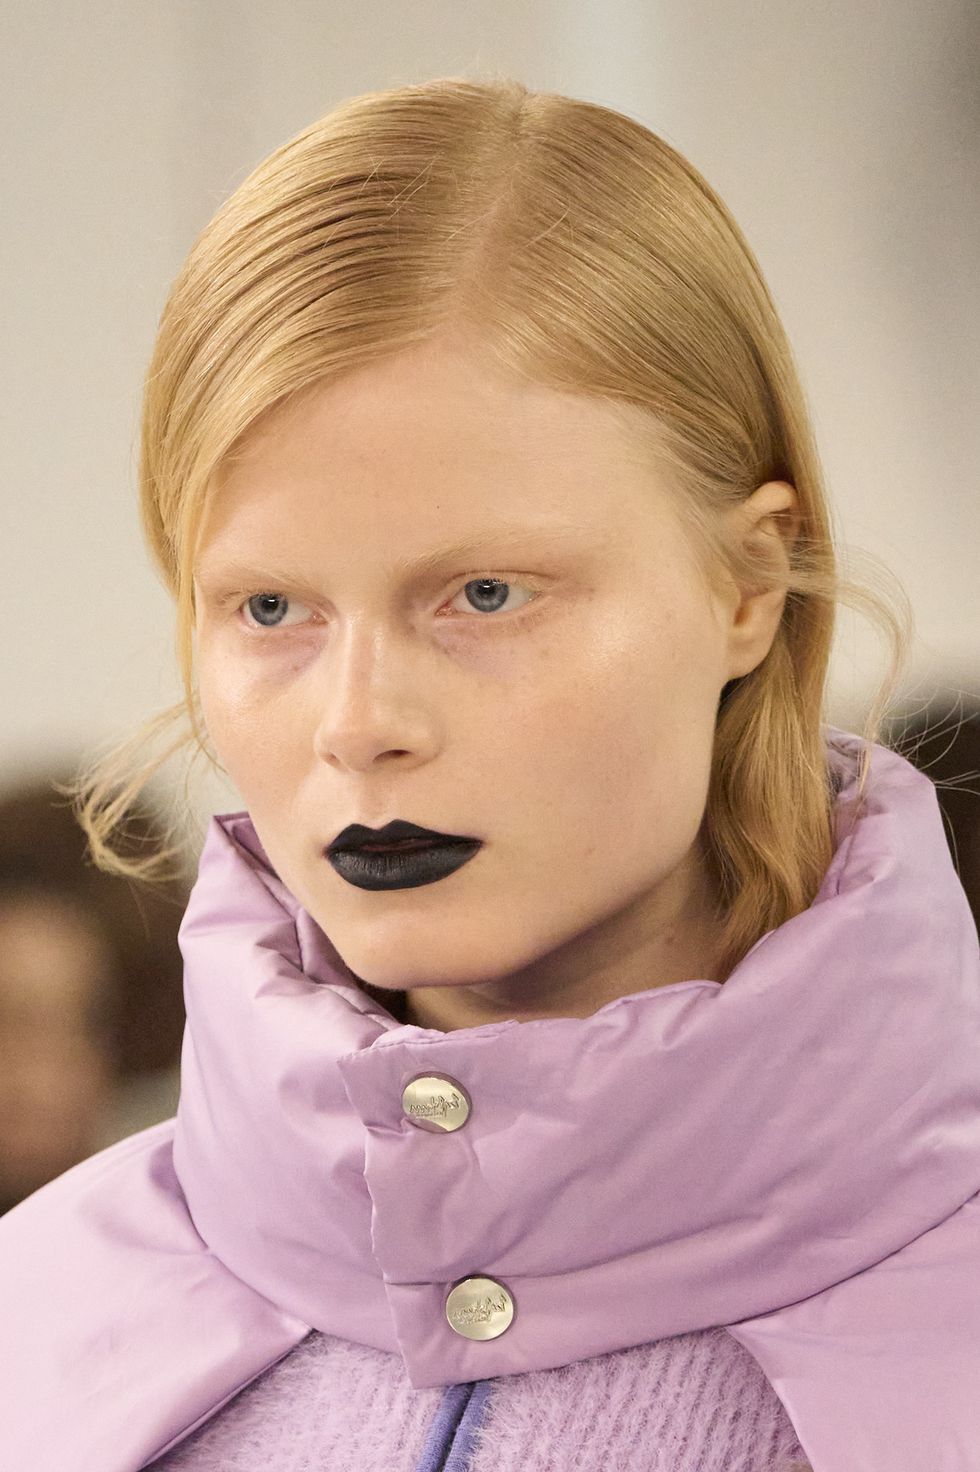 Best Makeup Trends From Fall 2023 Fashion Month — See Photos